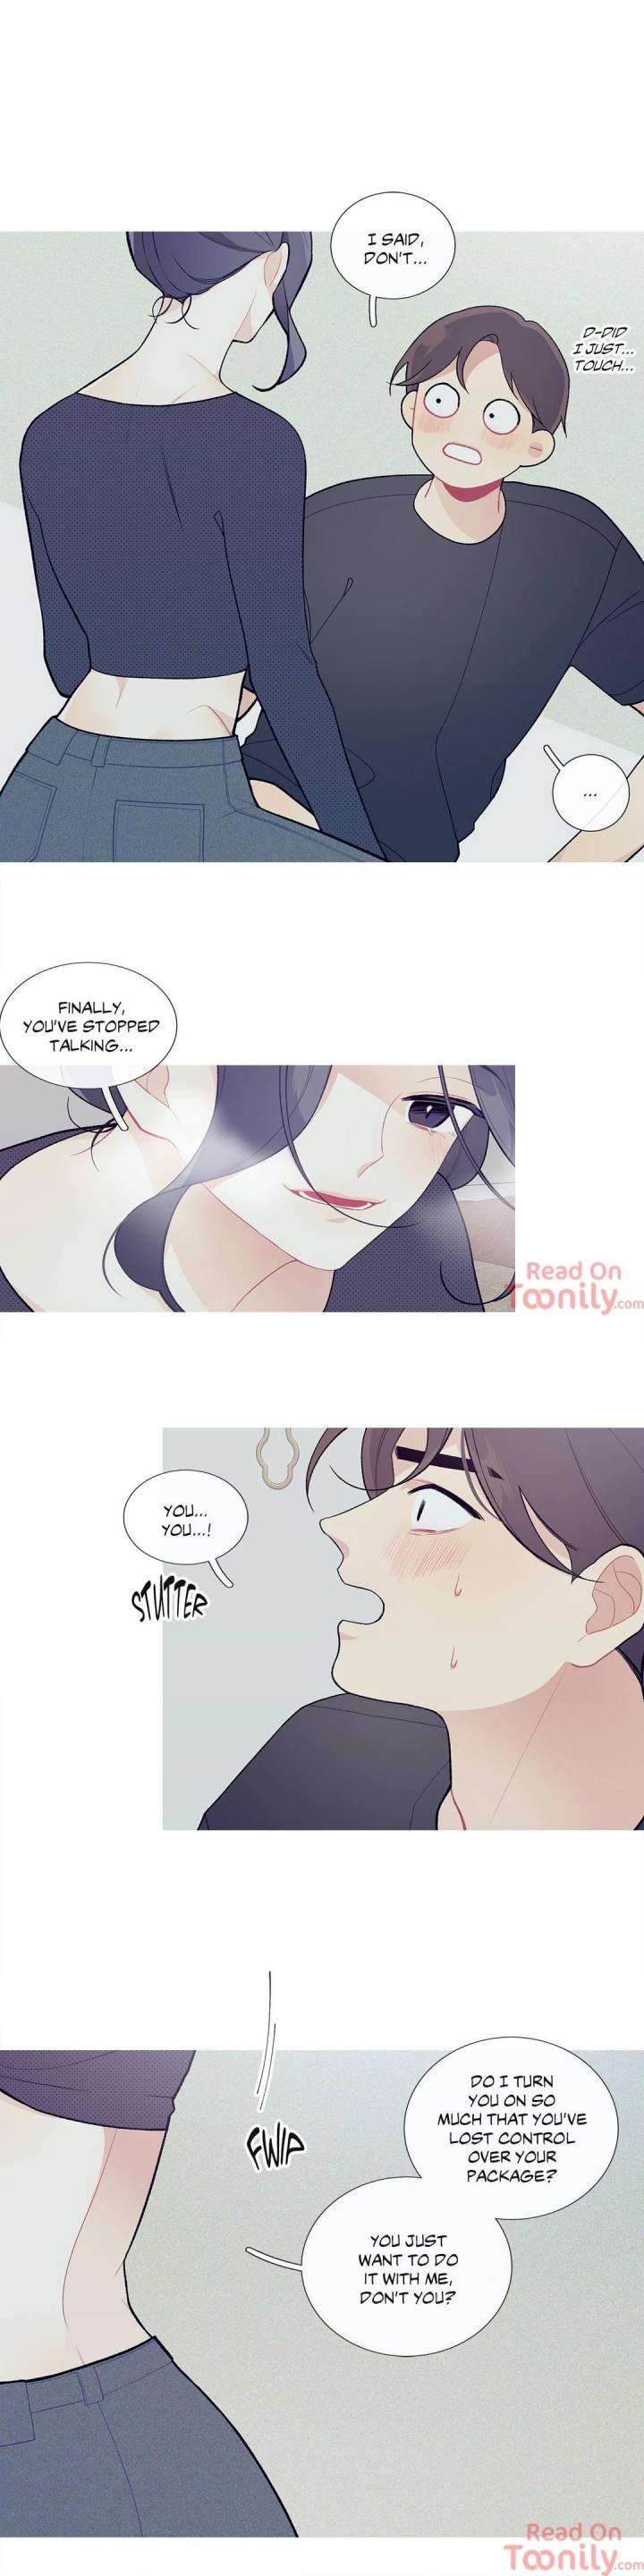 whats-going-on-chap-38-3